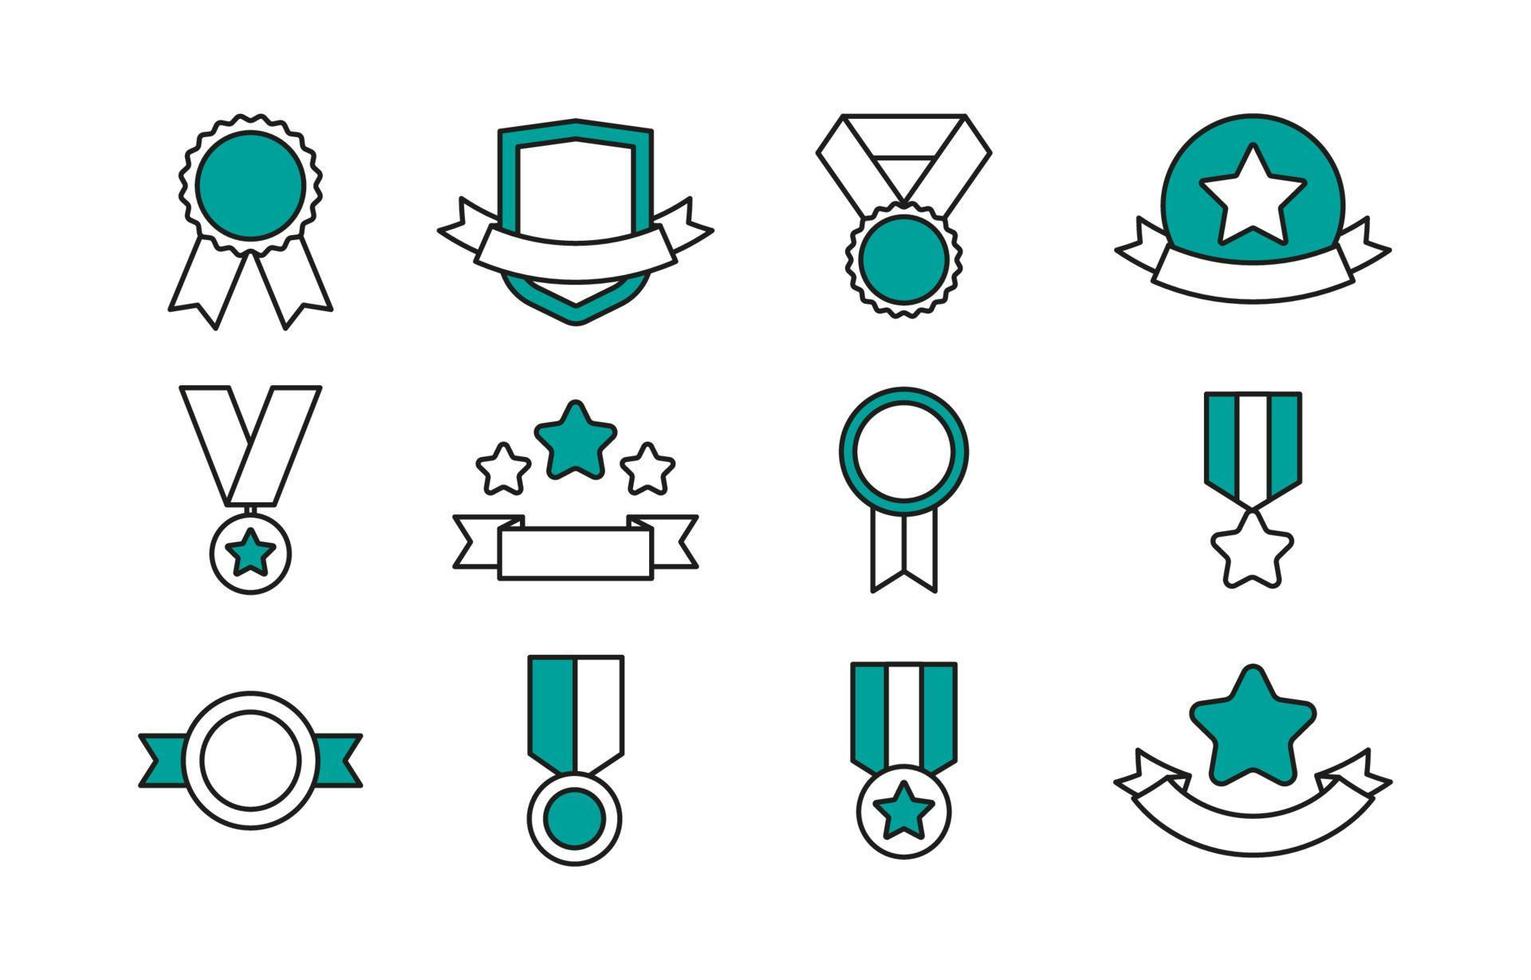 Simple Award Icons with Ribbon vector